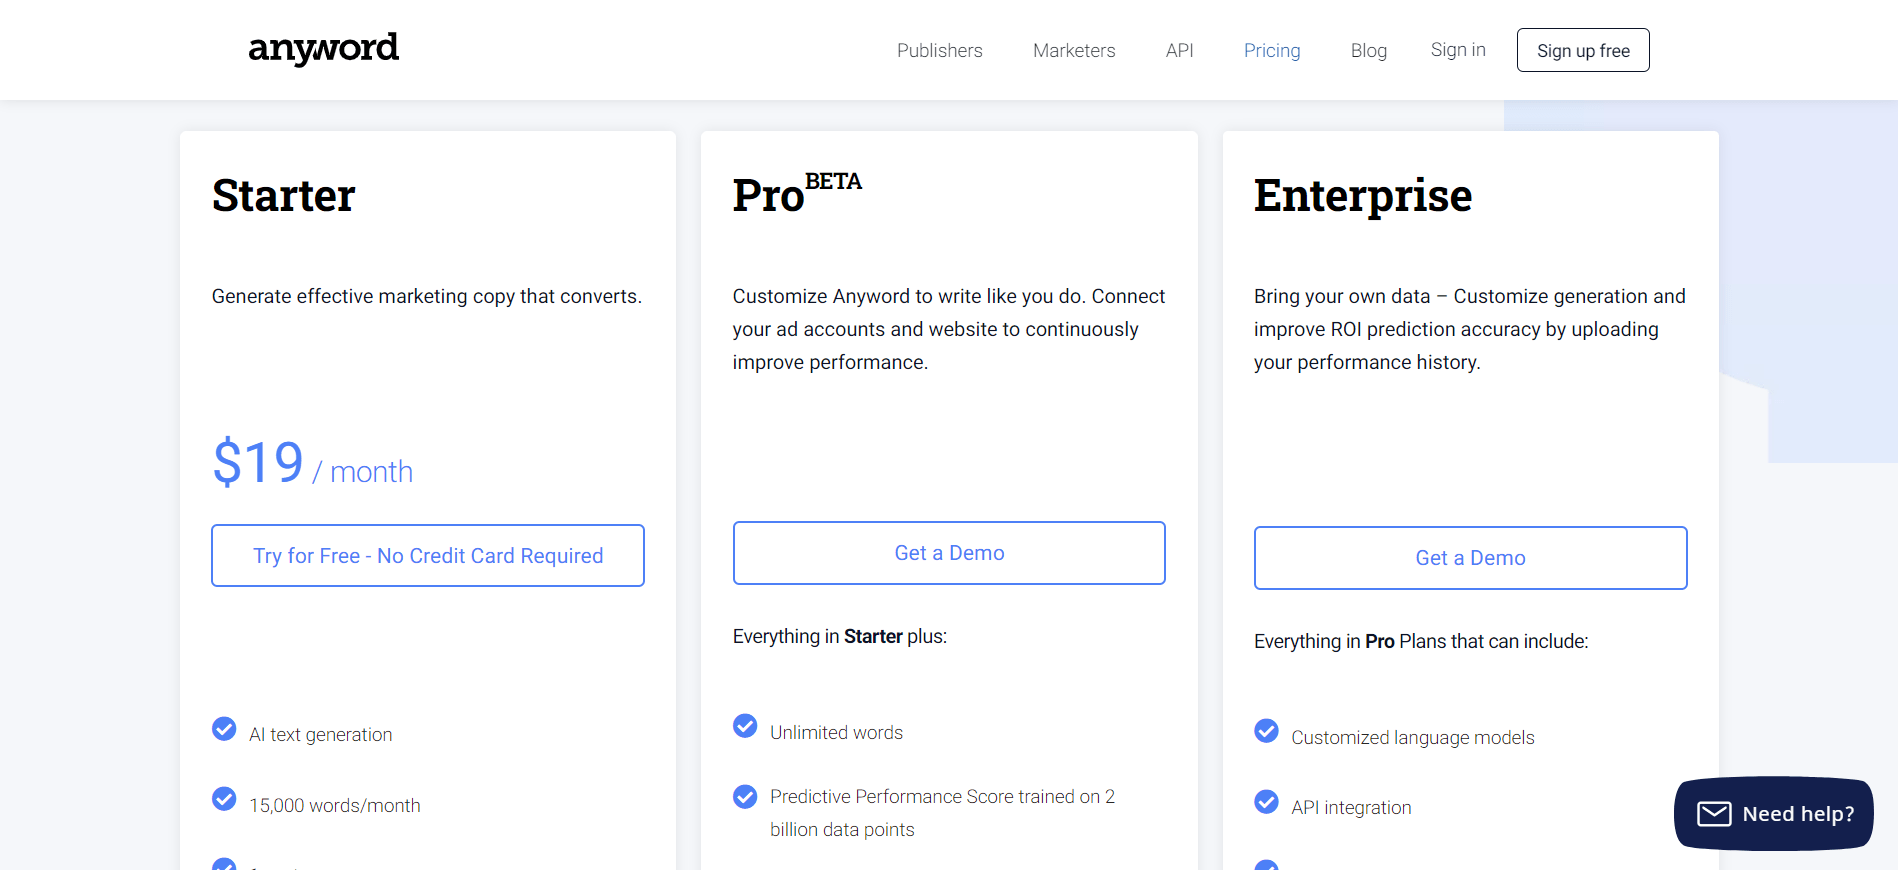 anyword pricing plans 